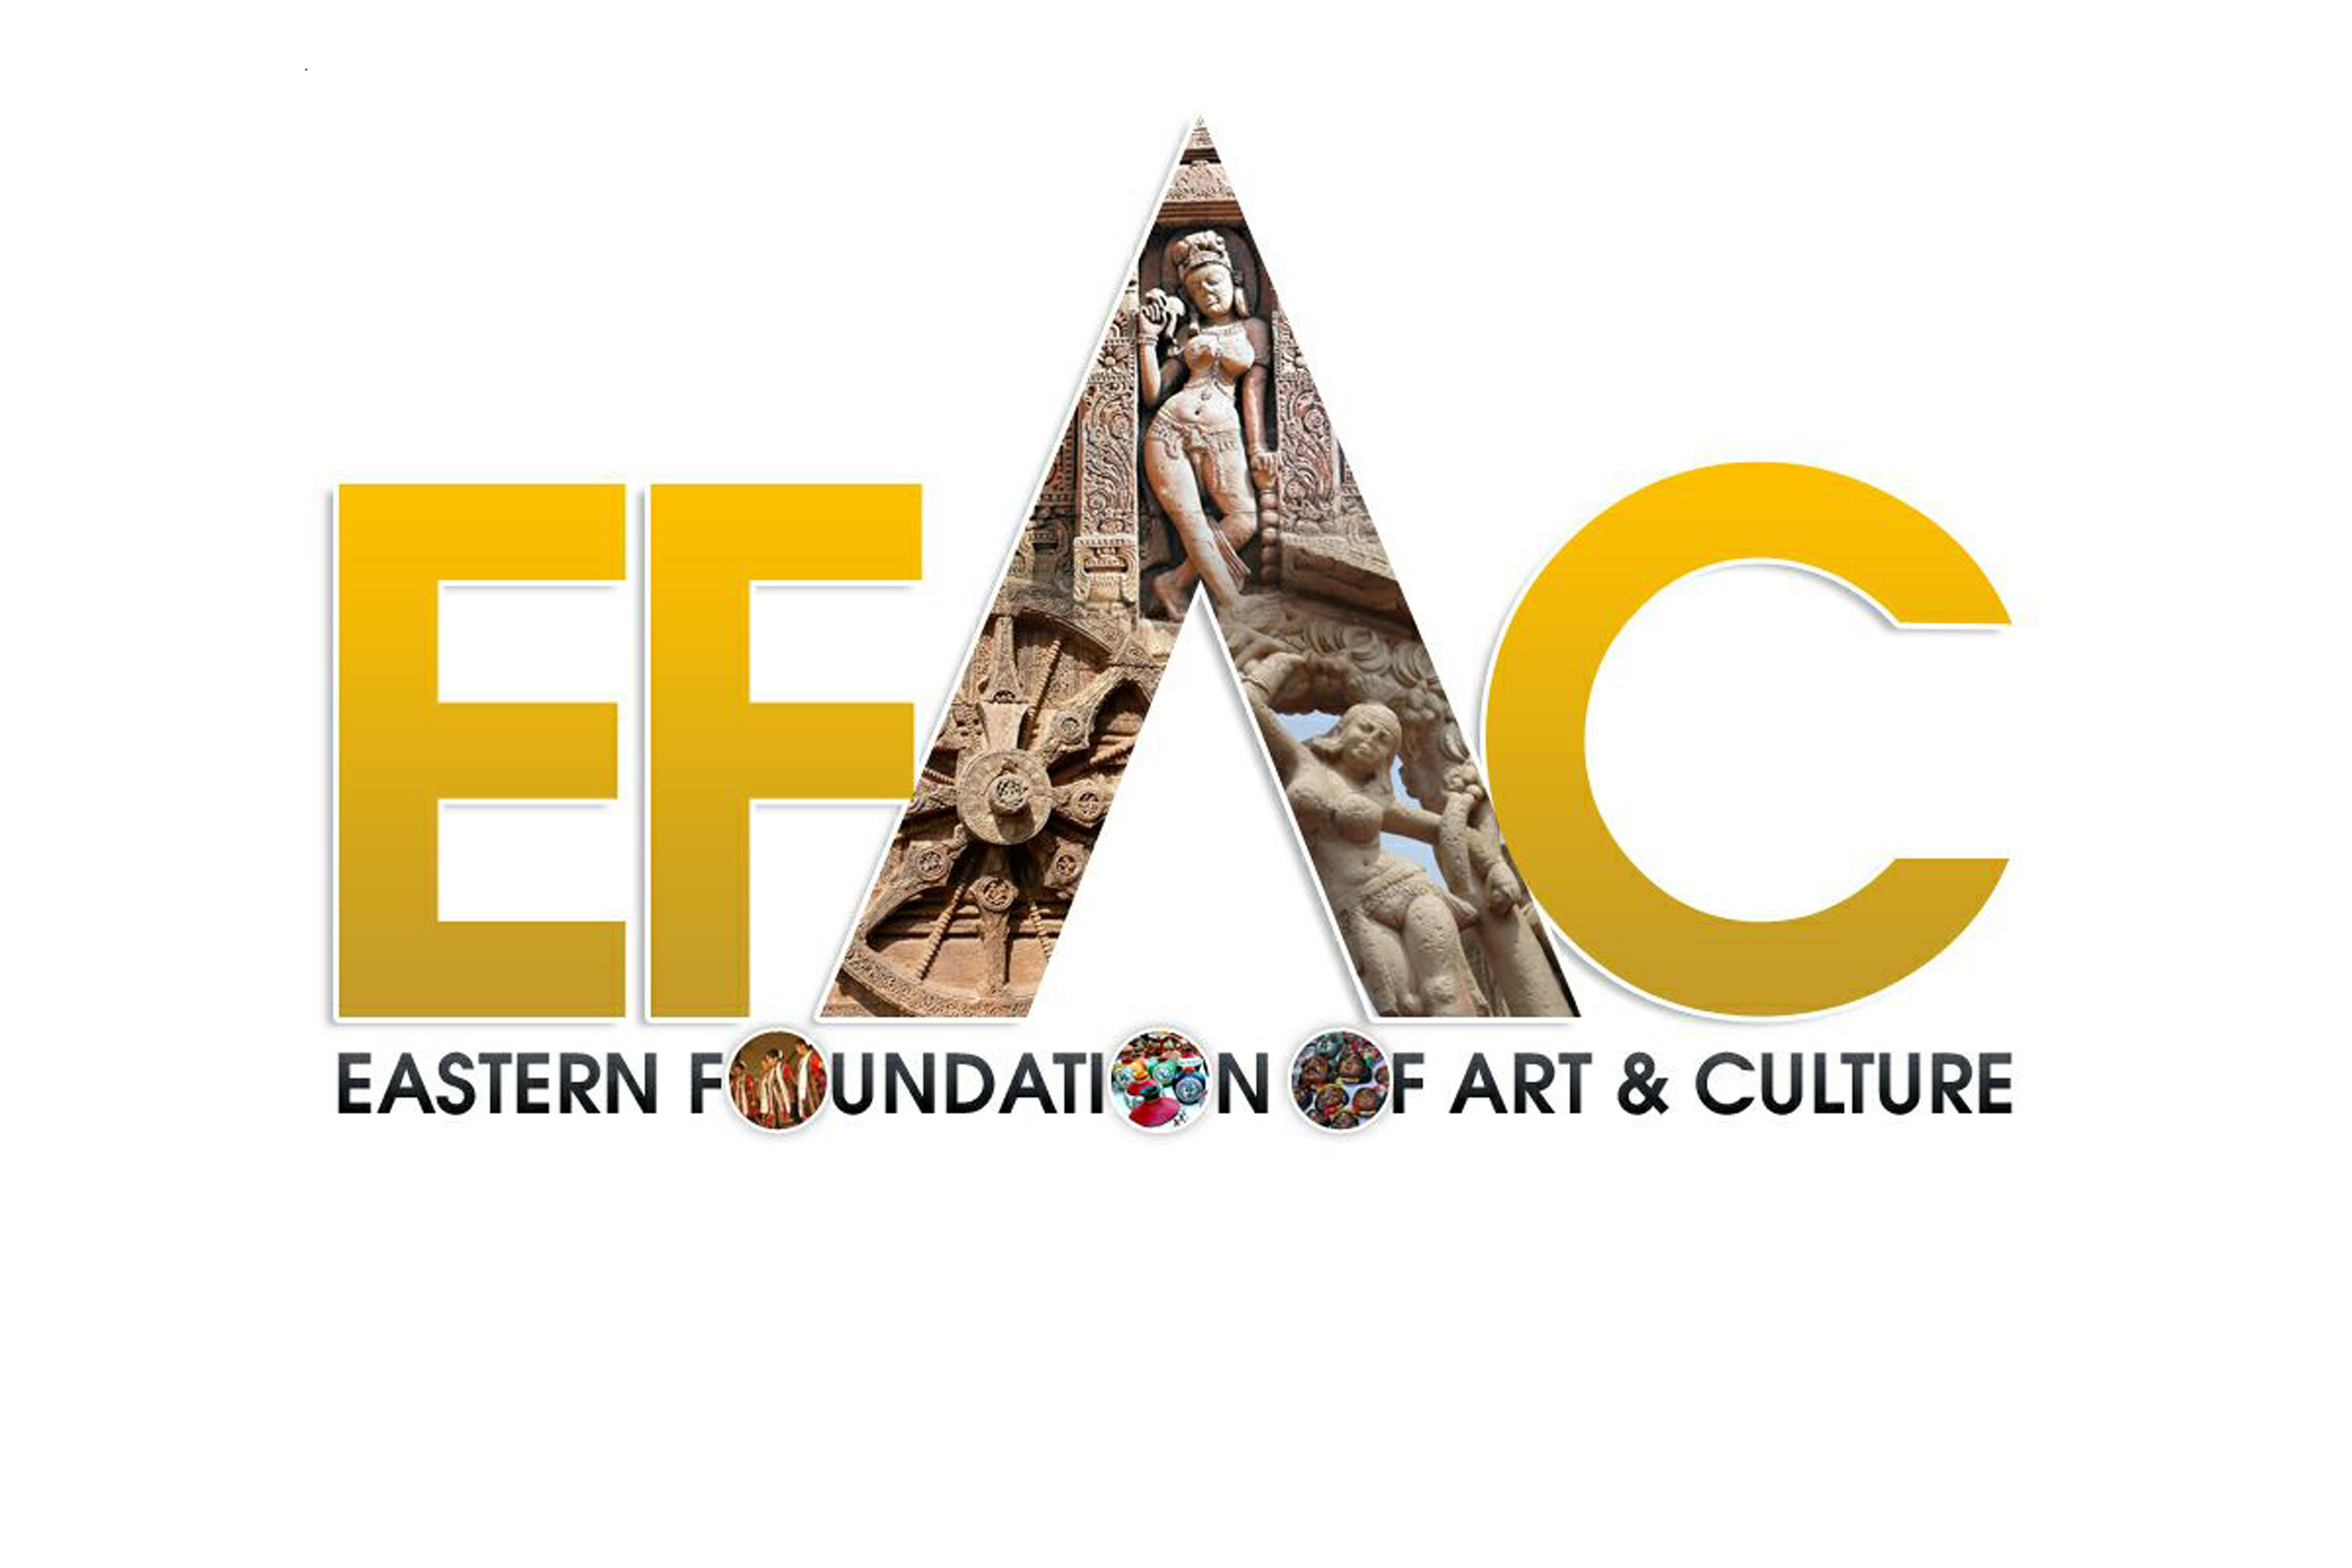 Eastern Foundation of Art & Culture